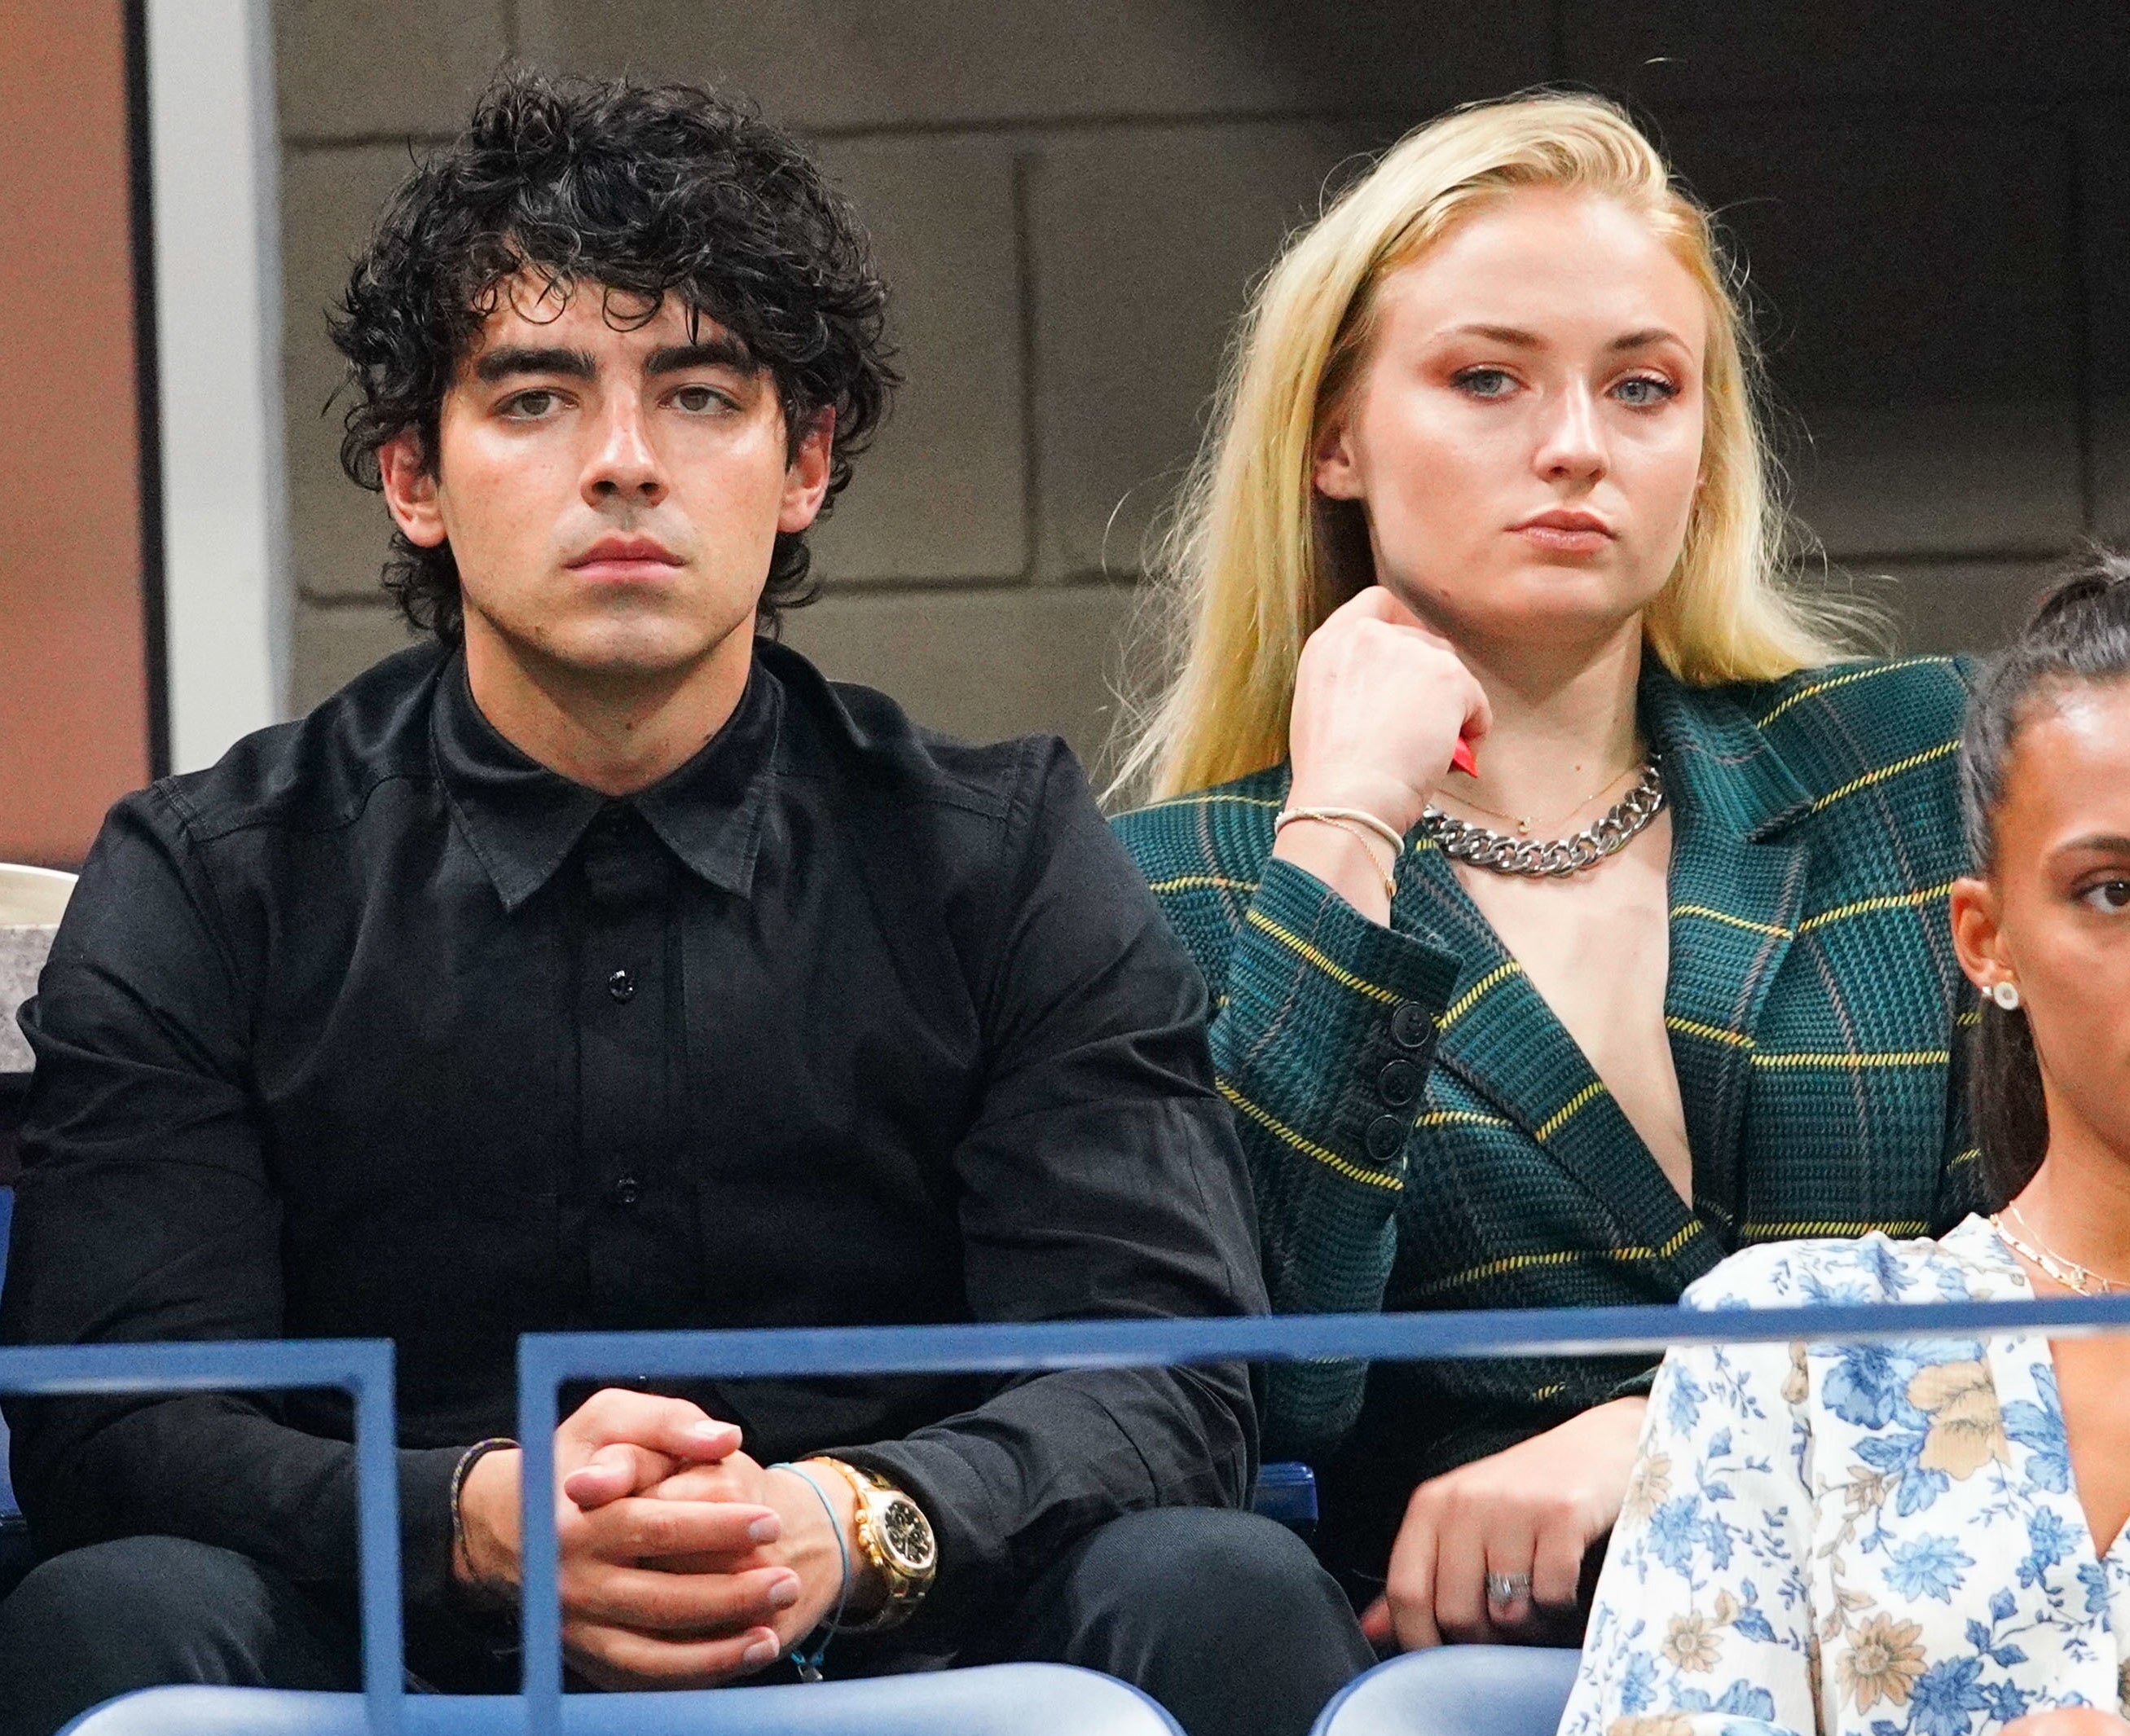 Close-up of Joe and Sophie sitting together in an audience